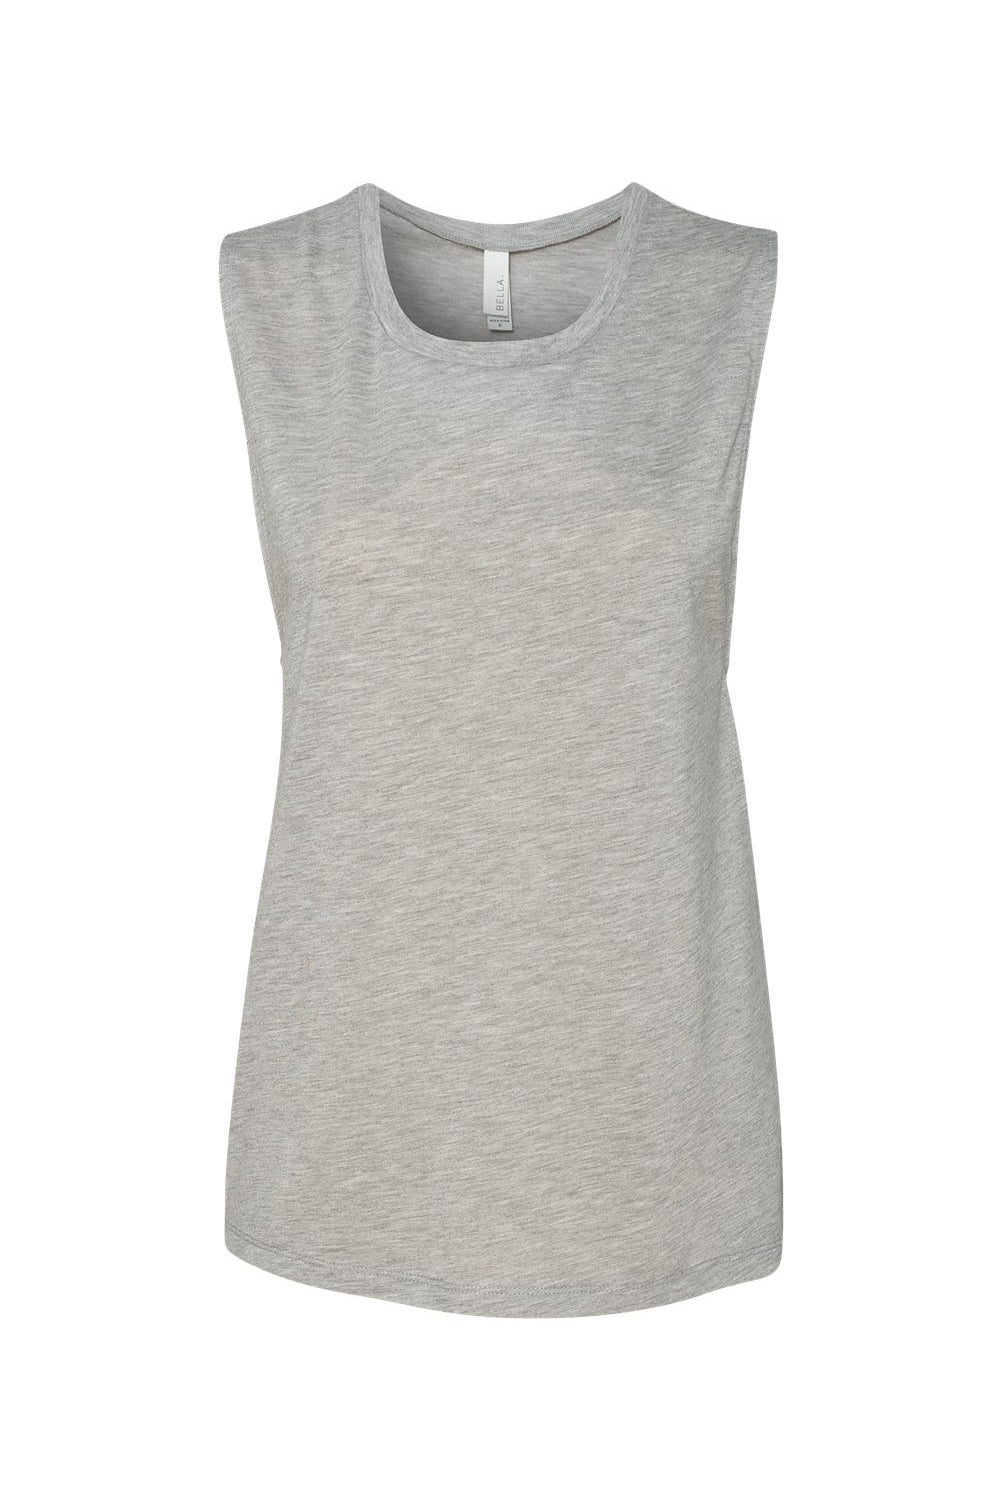 Bella + Canvas BC8803/B8803/8803 Womens Flowy Muscle Tank Top Heather Grey Flat Front